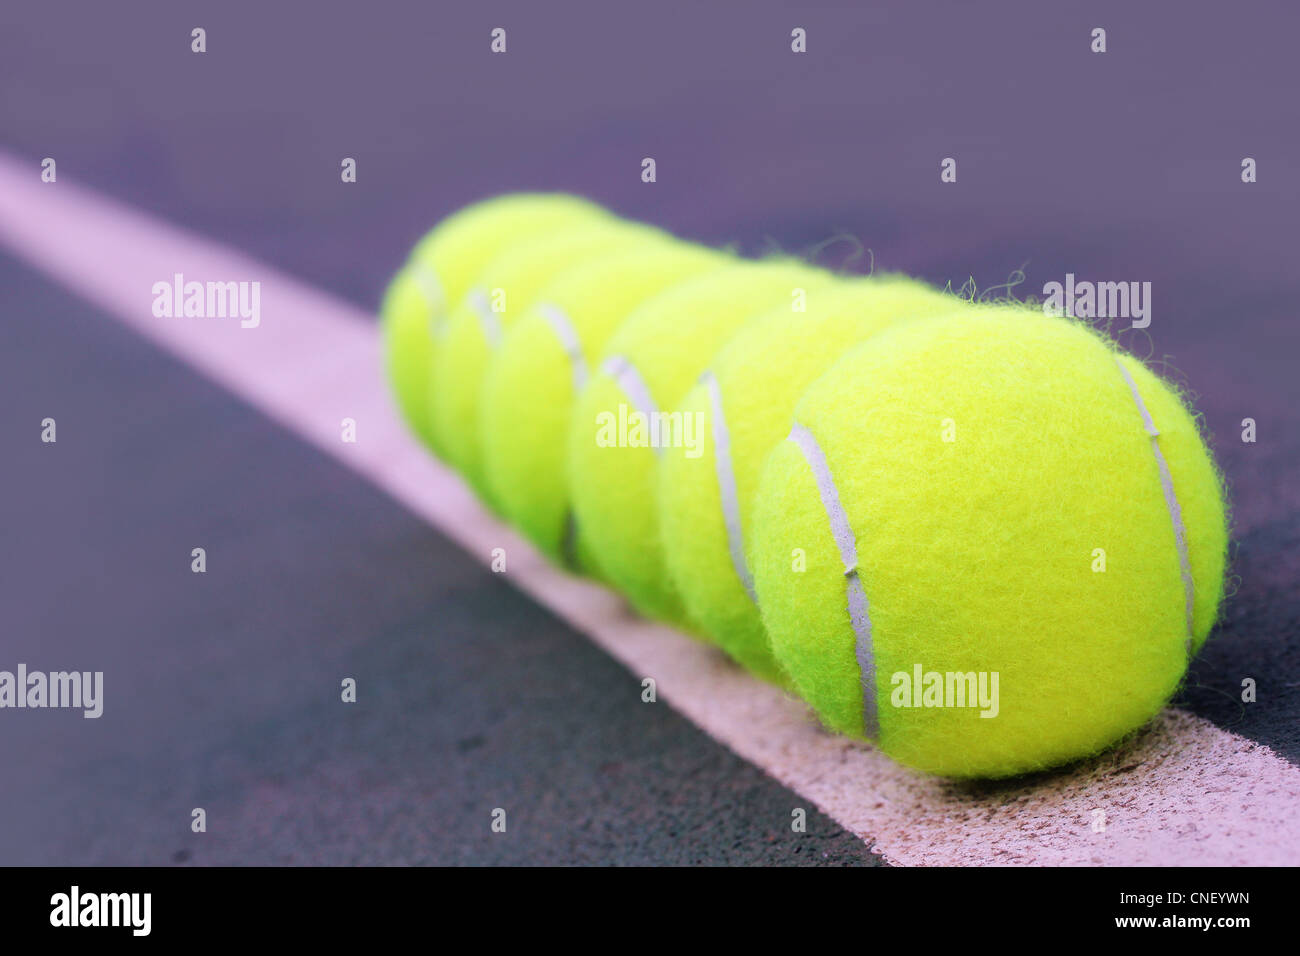 Tennis balls close up arranged in row on hard court synthetic tennis turf Stock Photo